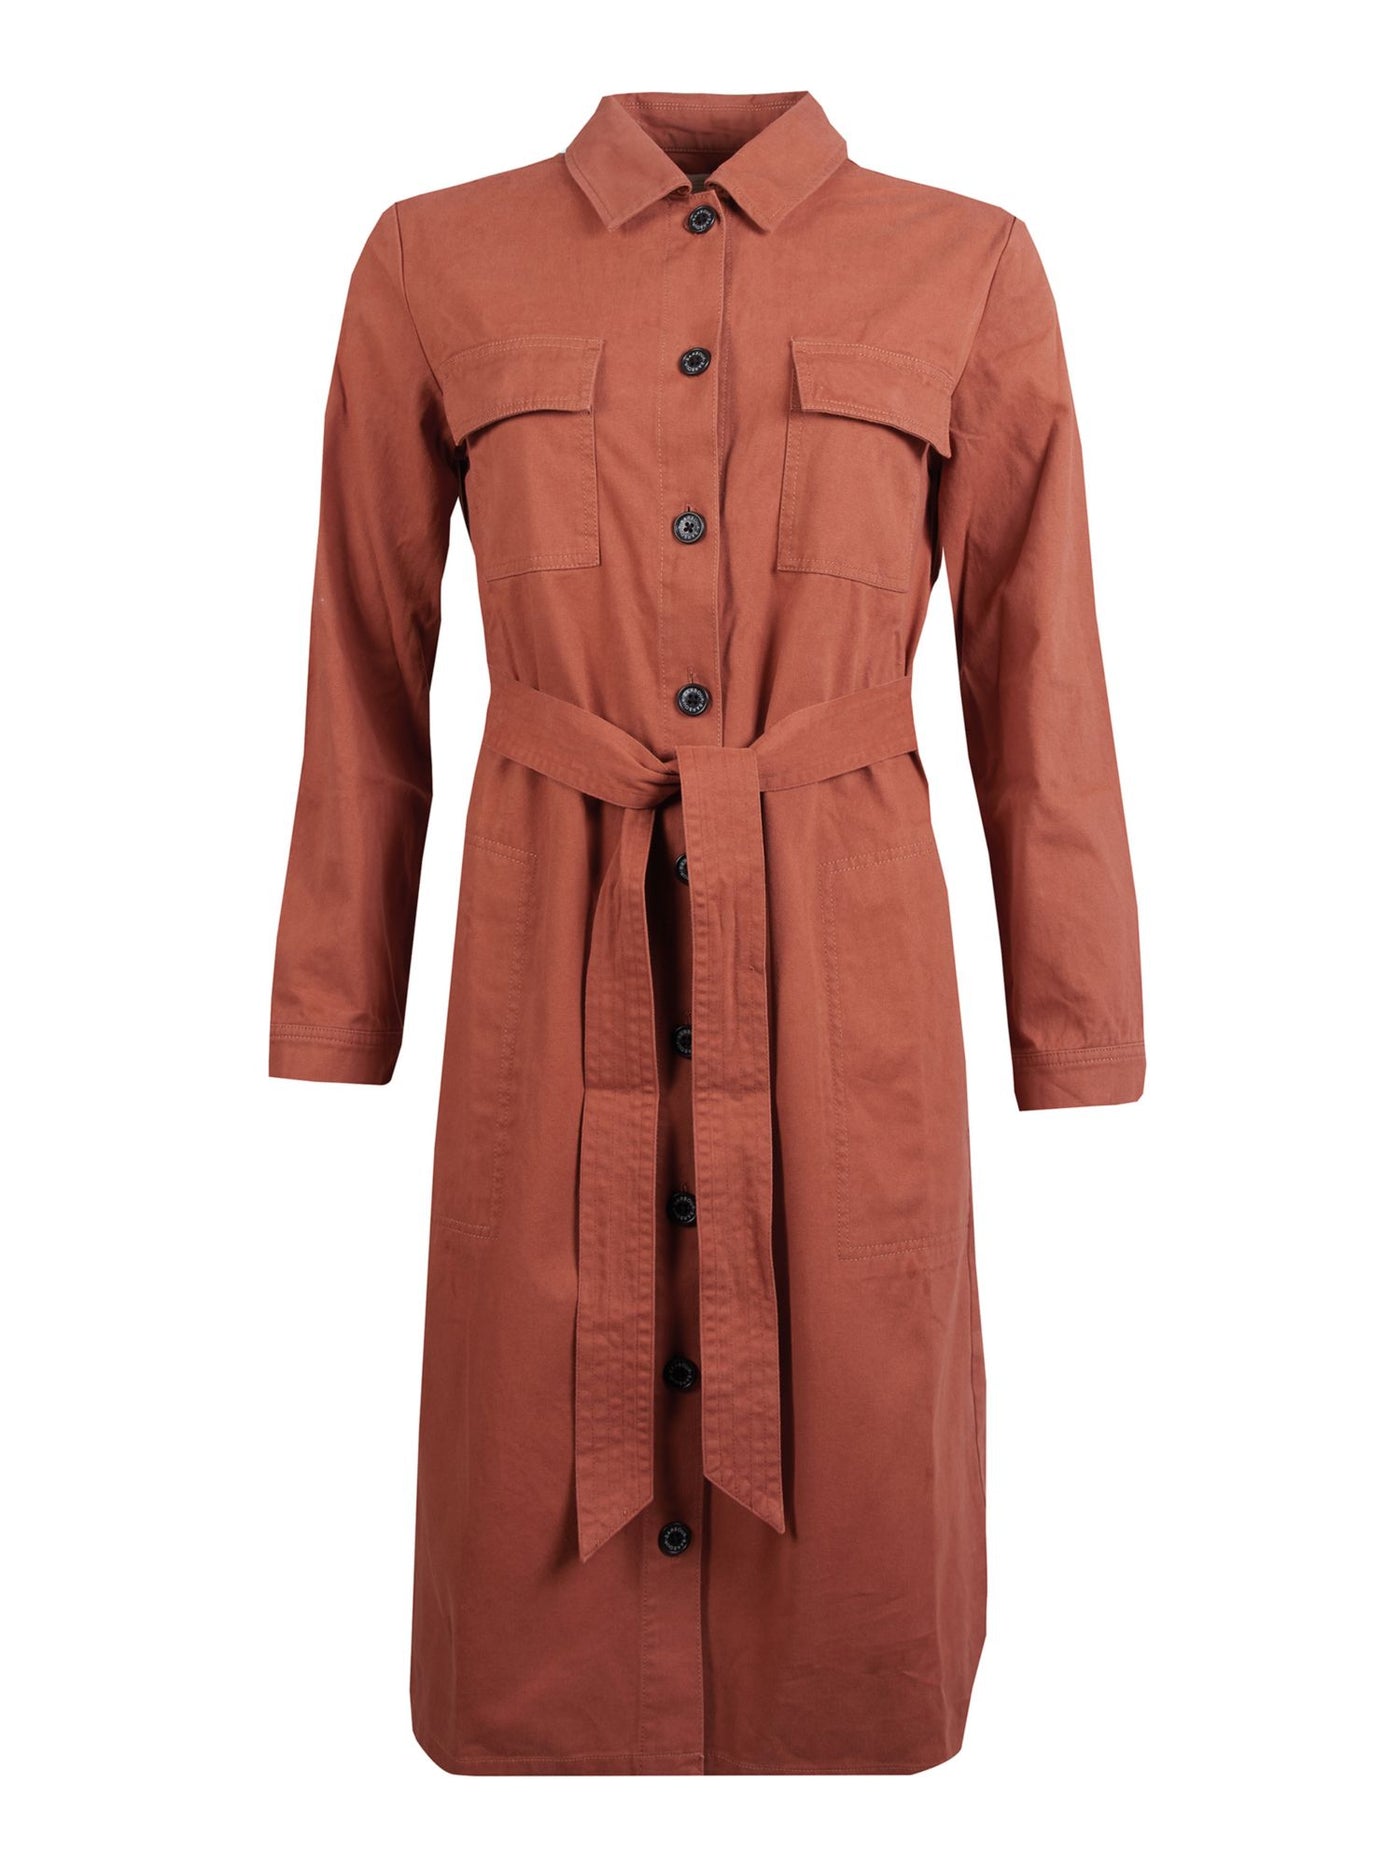 BARBOUR Womens Tie Long Sleeve Collared Midi Shirt Dress